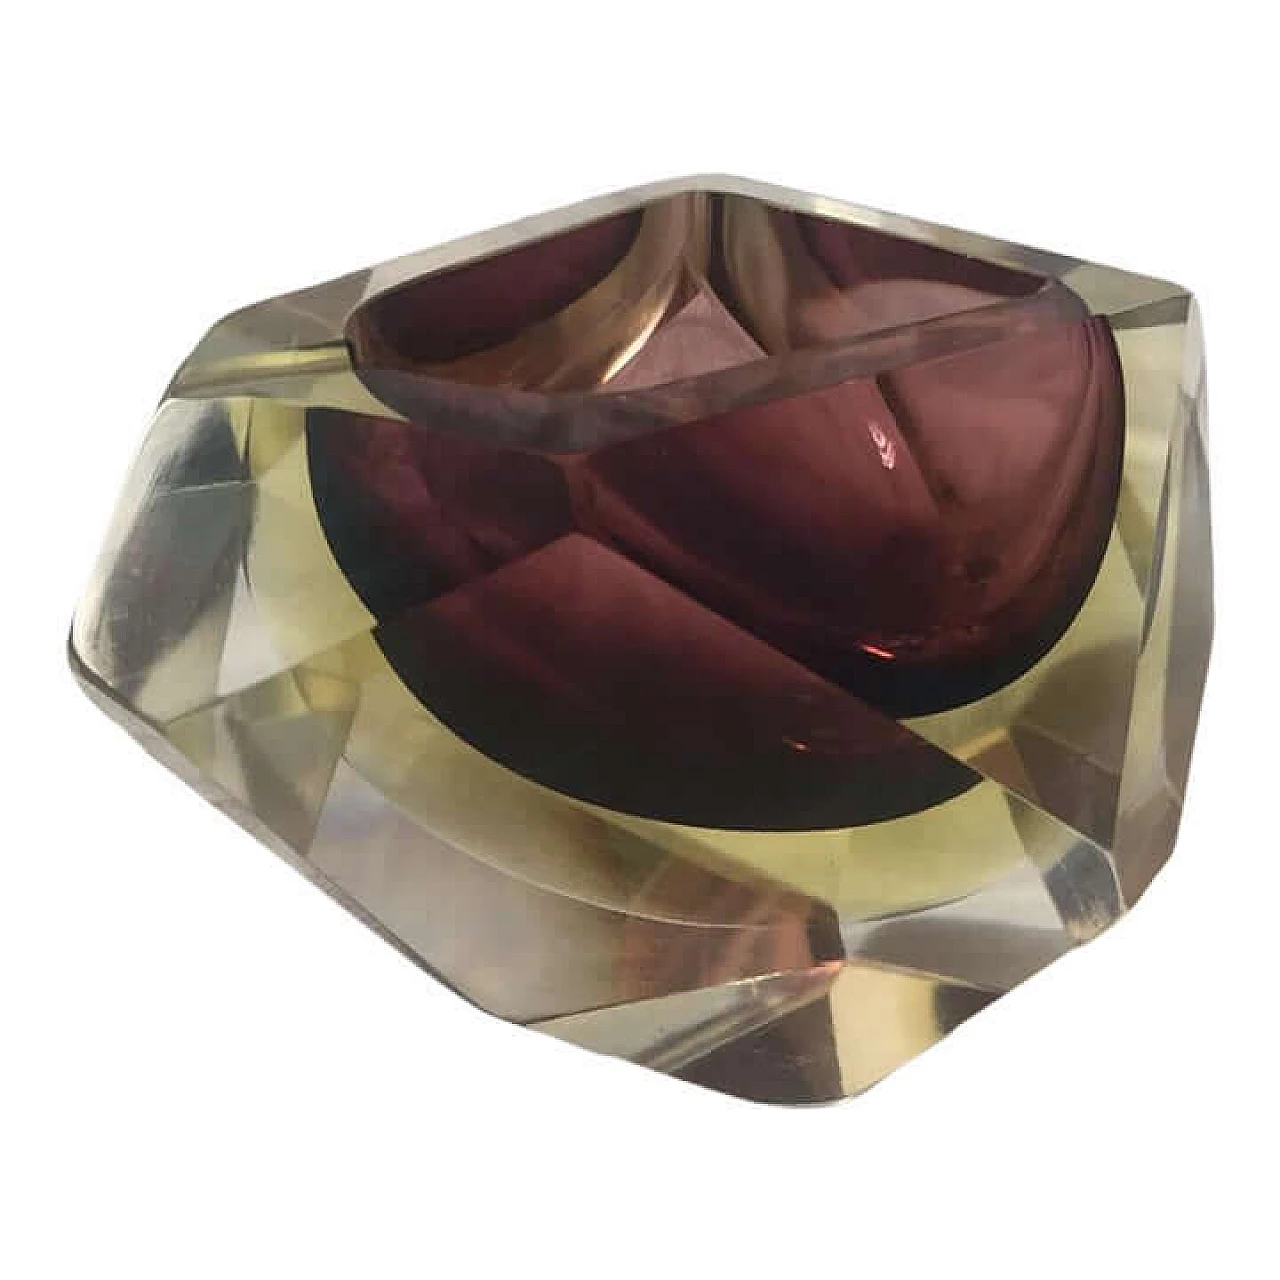 Seguso-style facetted submerged Murano glass ashtray, 1970s 10